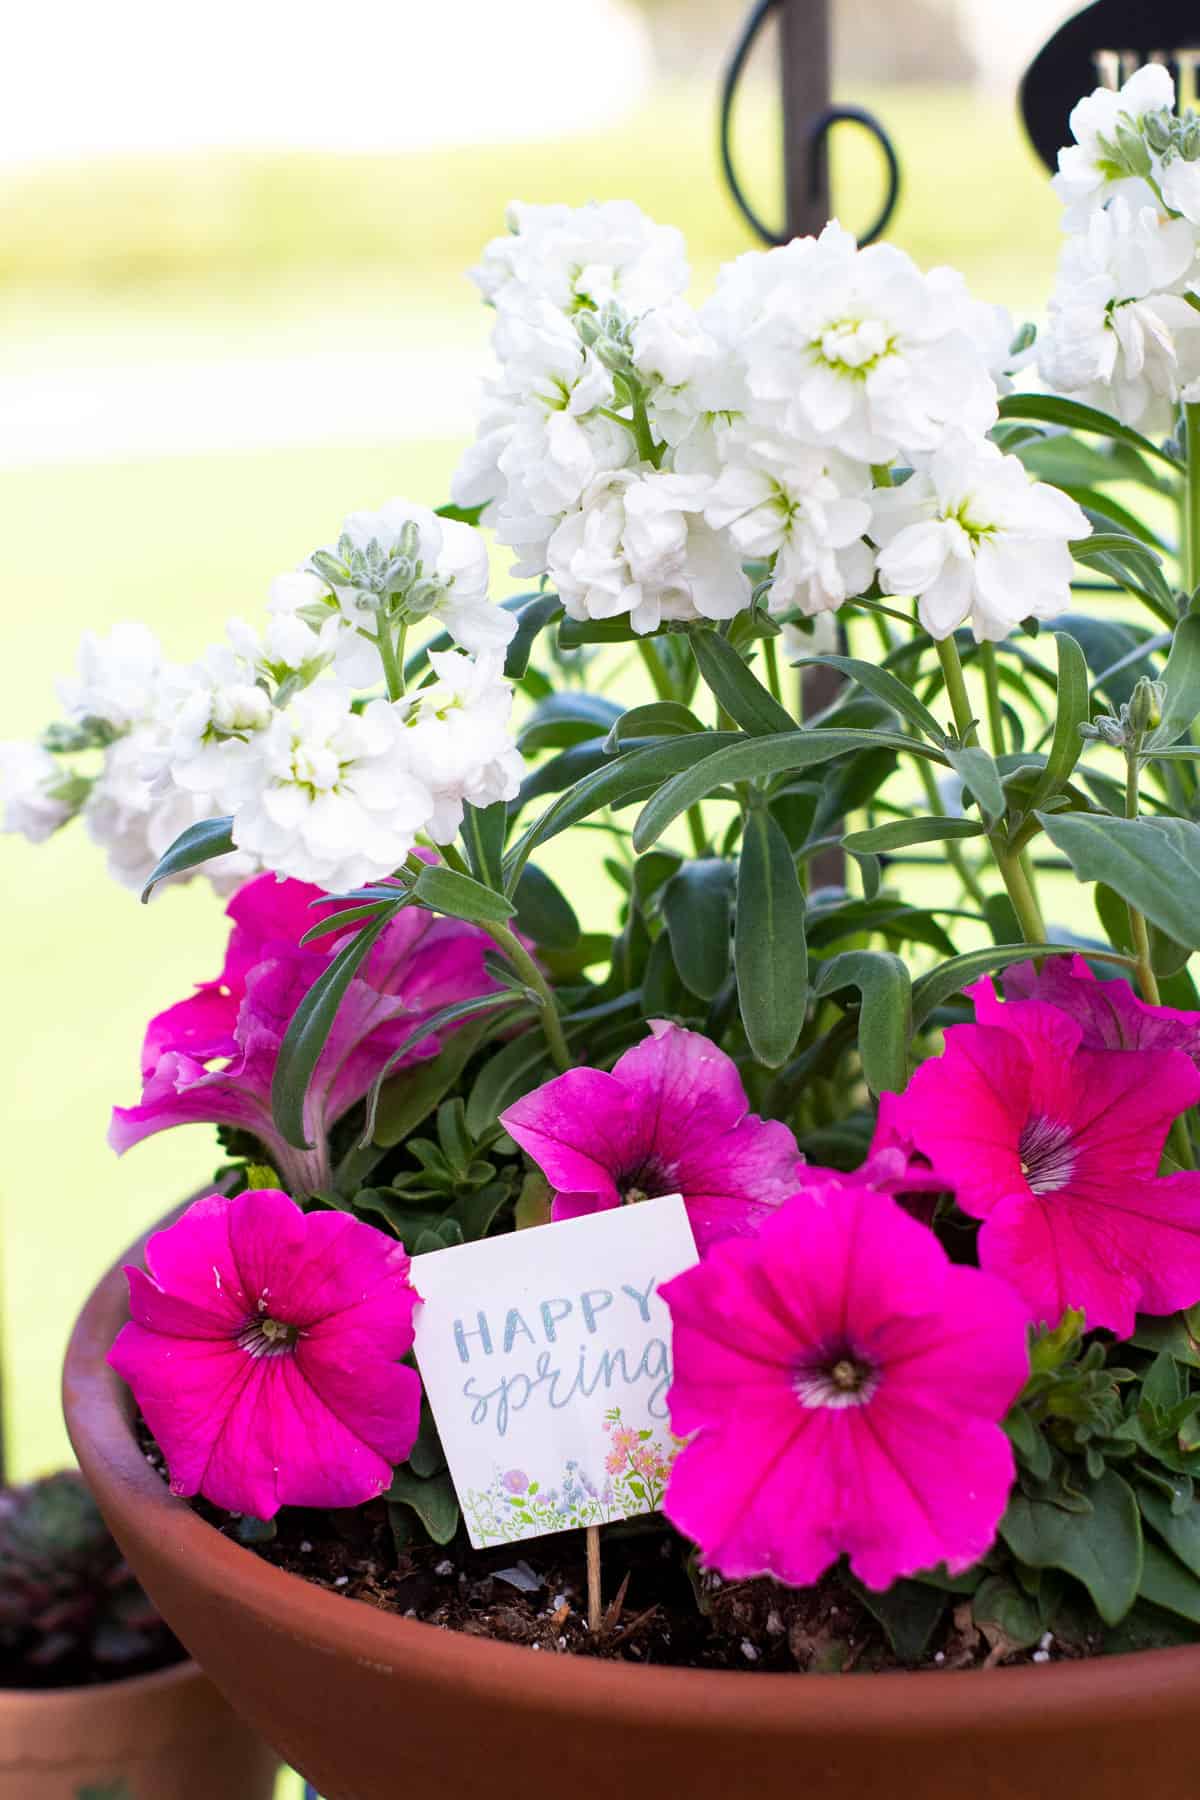 stock flowers in a terra cotta pot with petunias